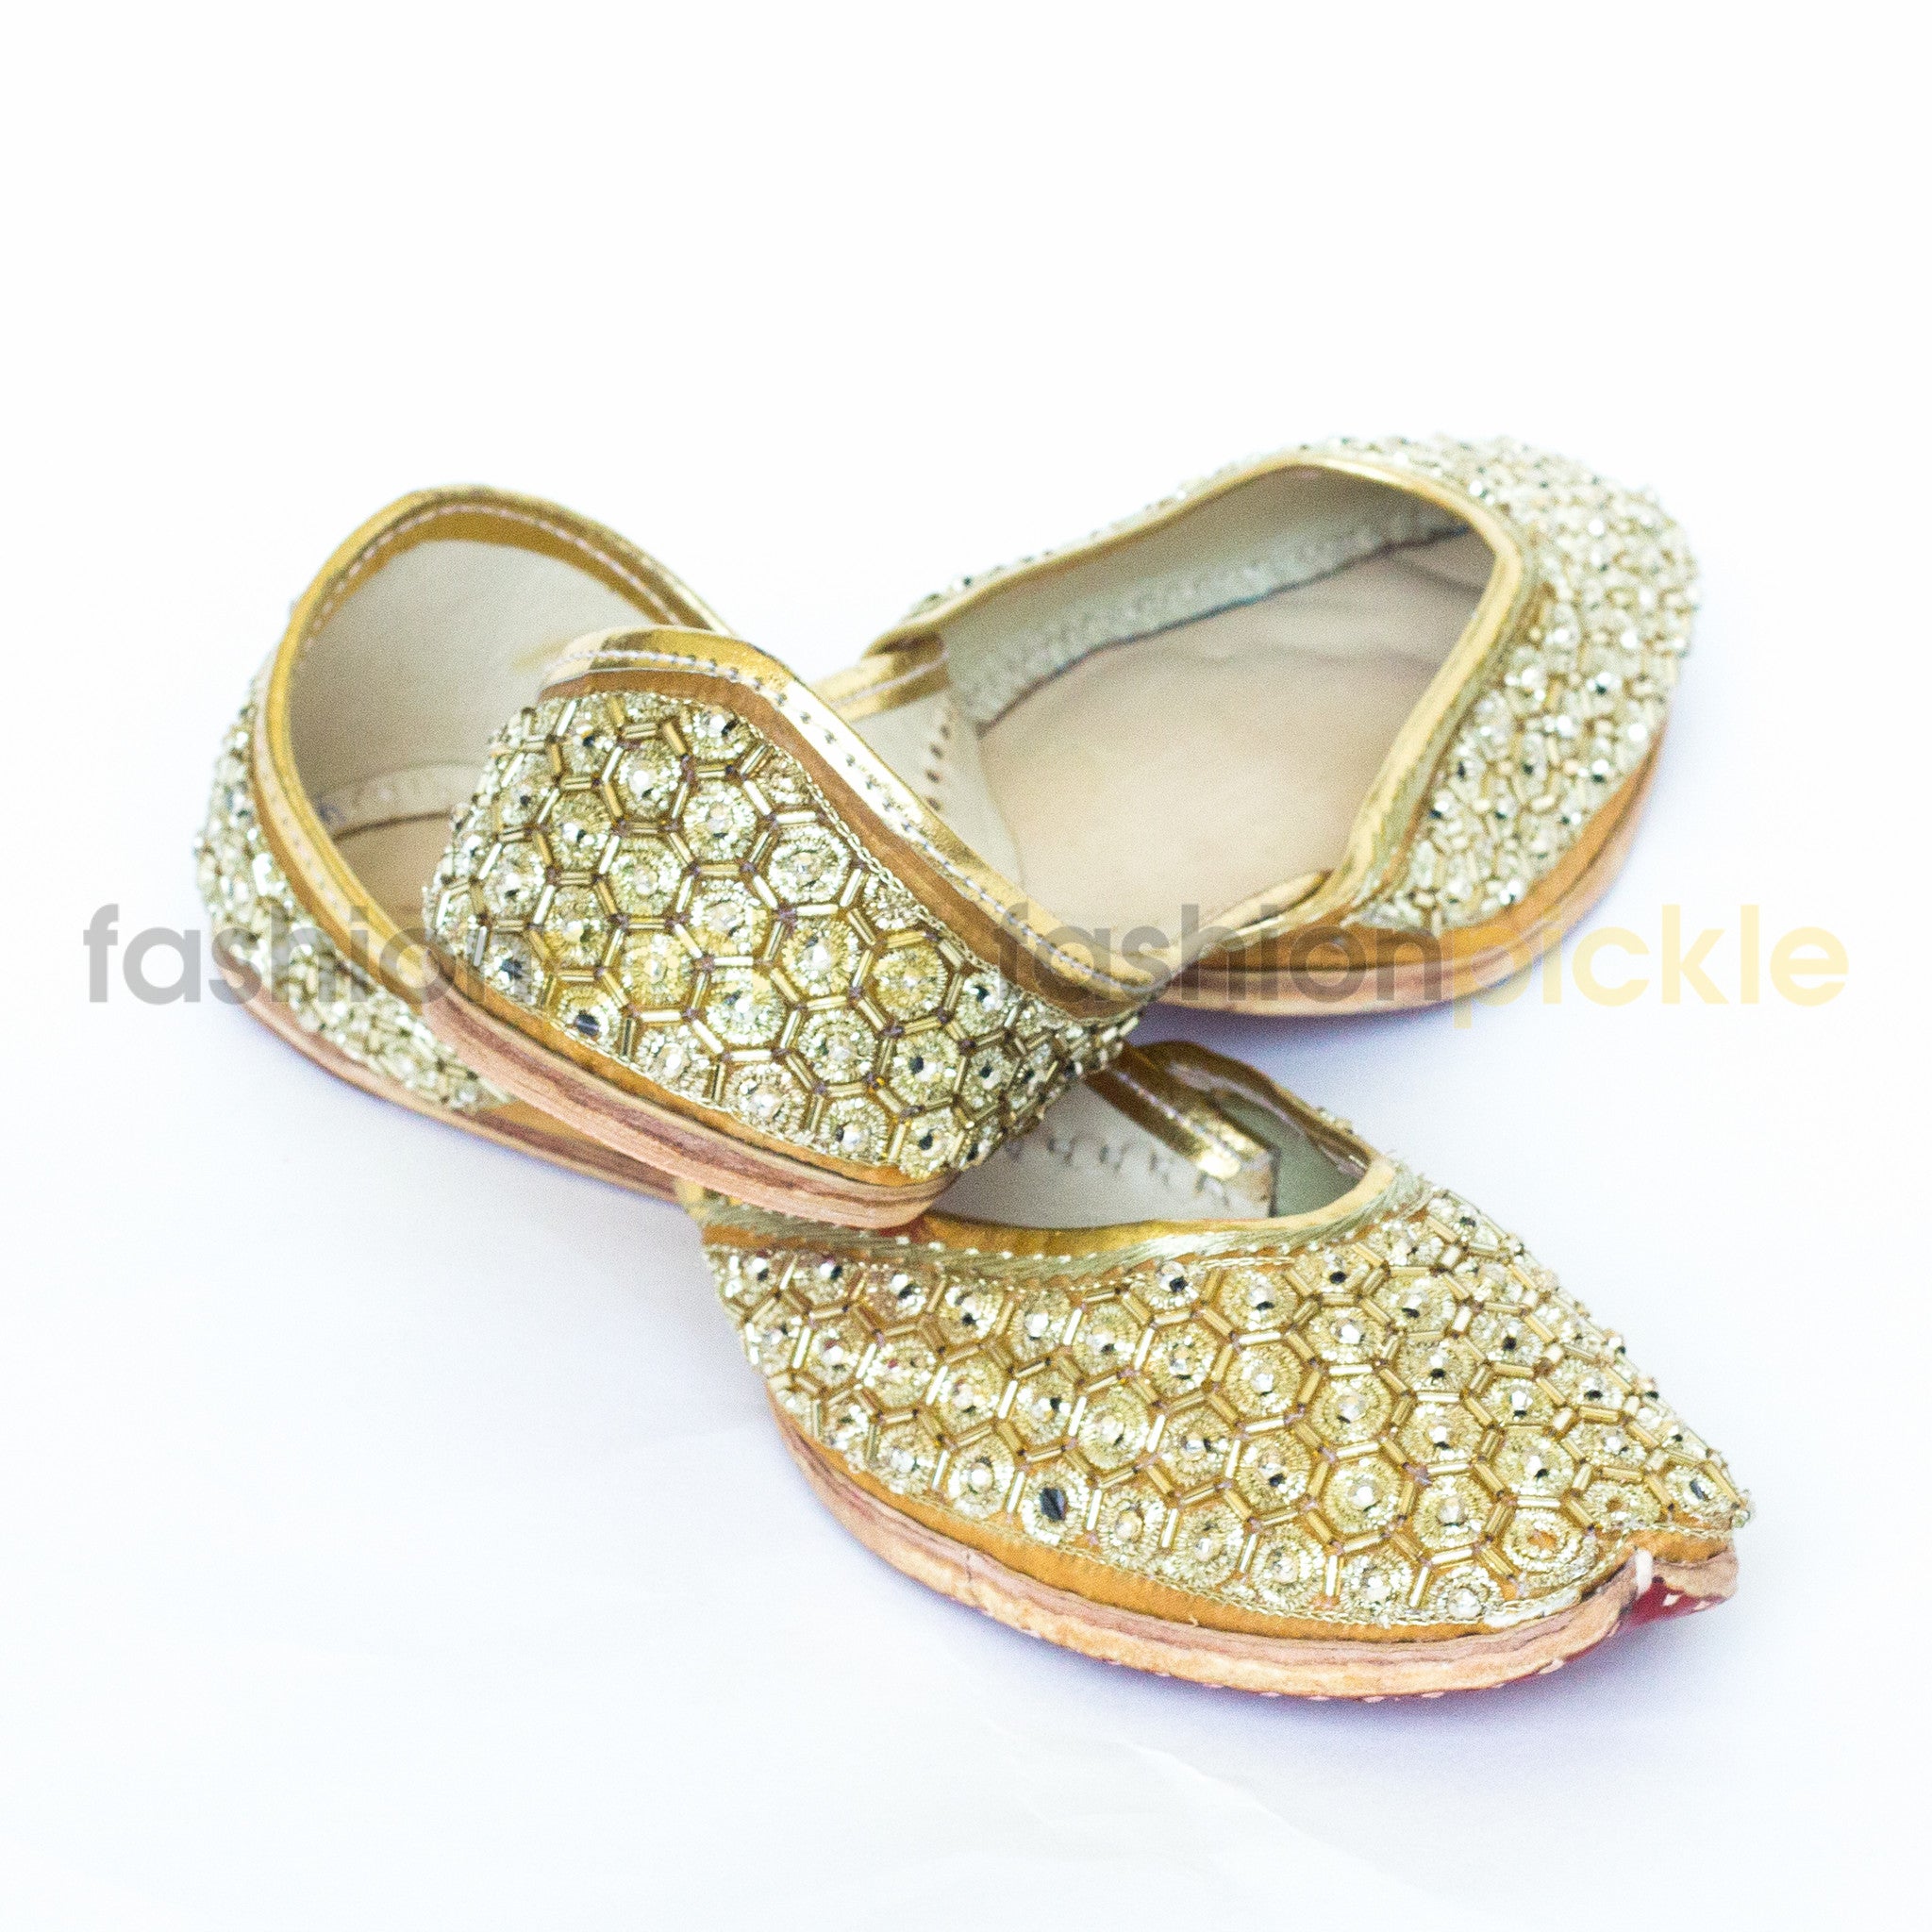 Cream and Gold Embroidery Handmade Shoes - Fashion Pickle